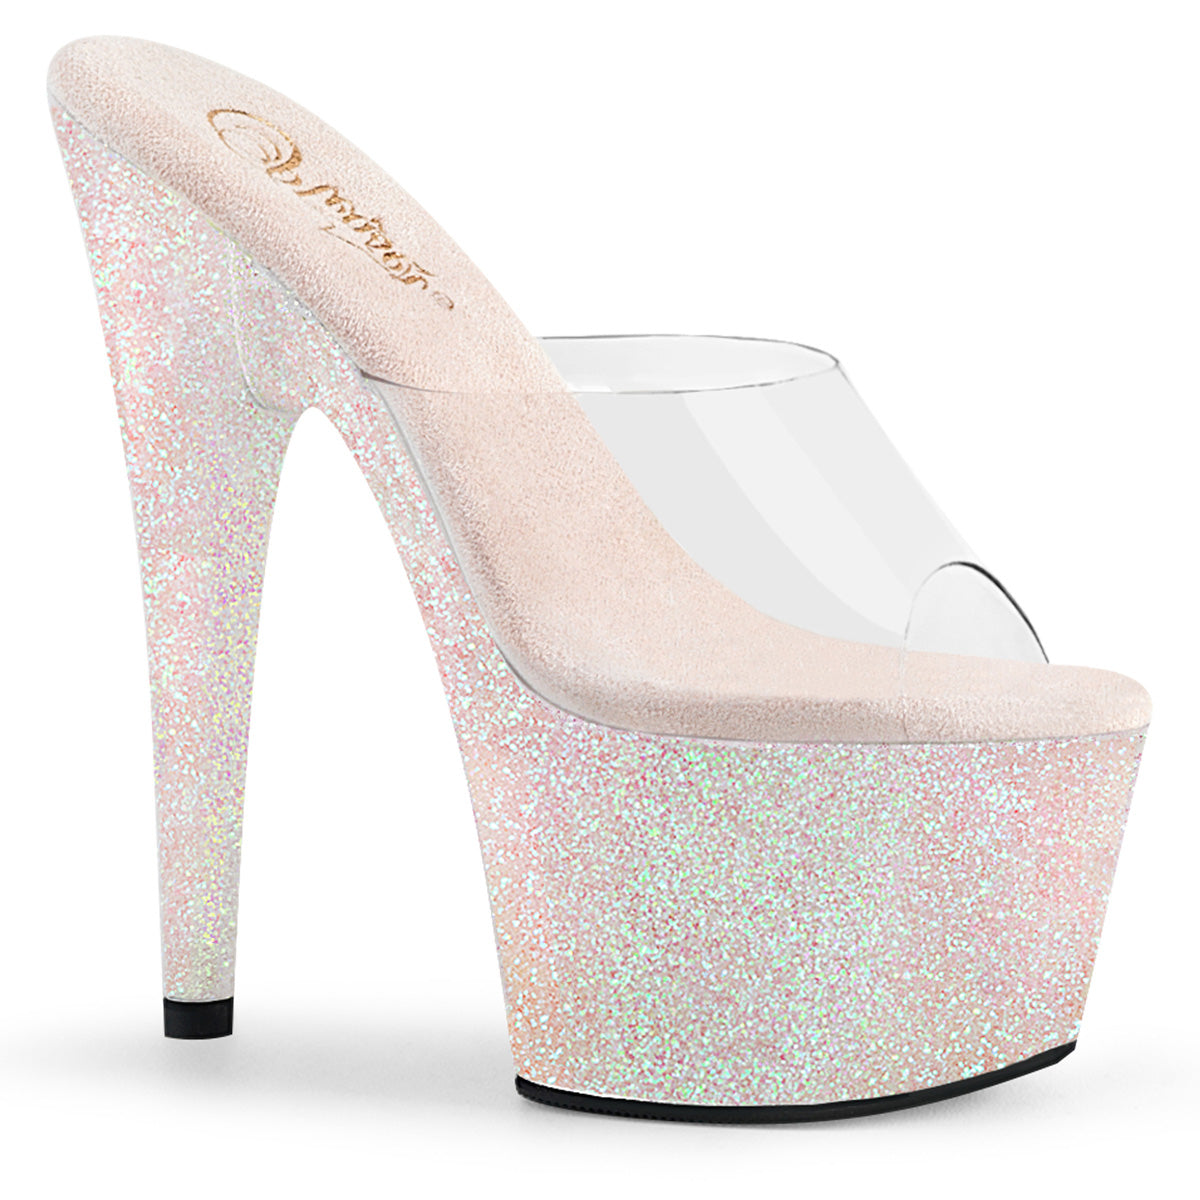 ADORE-701HMG 7" Heel Clear Opal Glitter Pole Dancer Shoes-Pleaser- Sexy Shoes